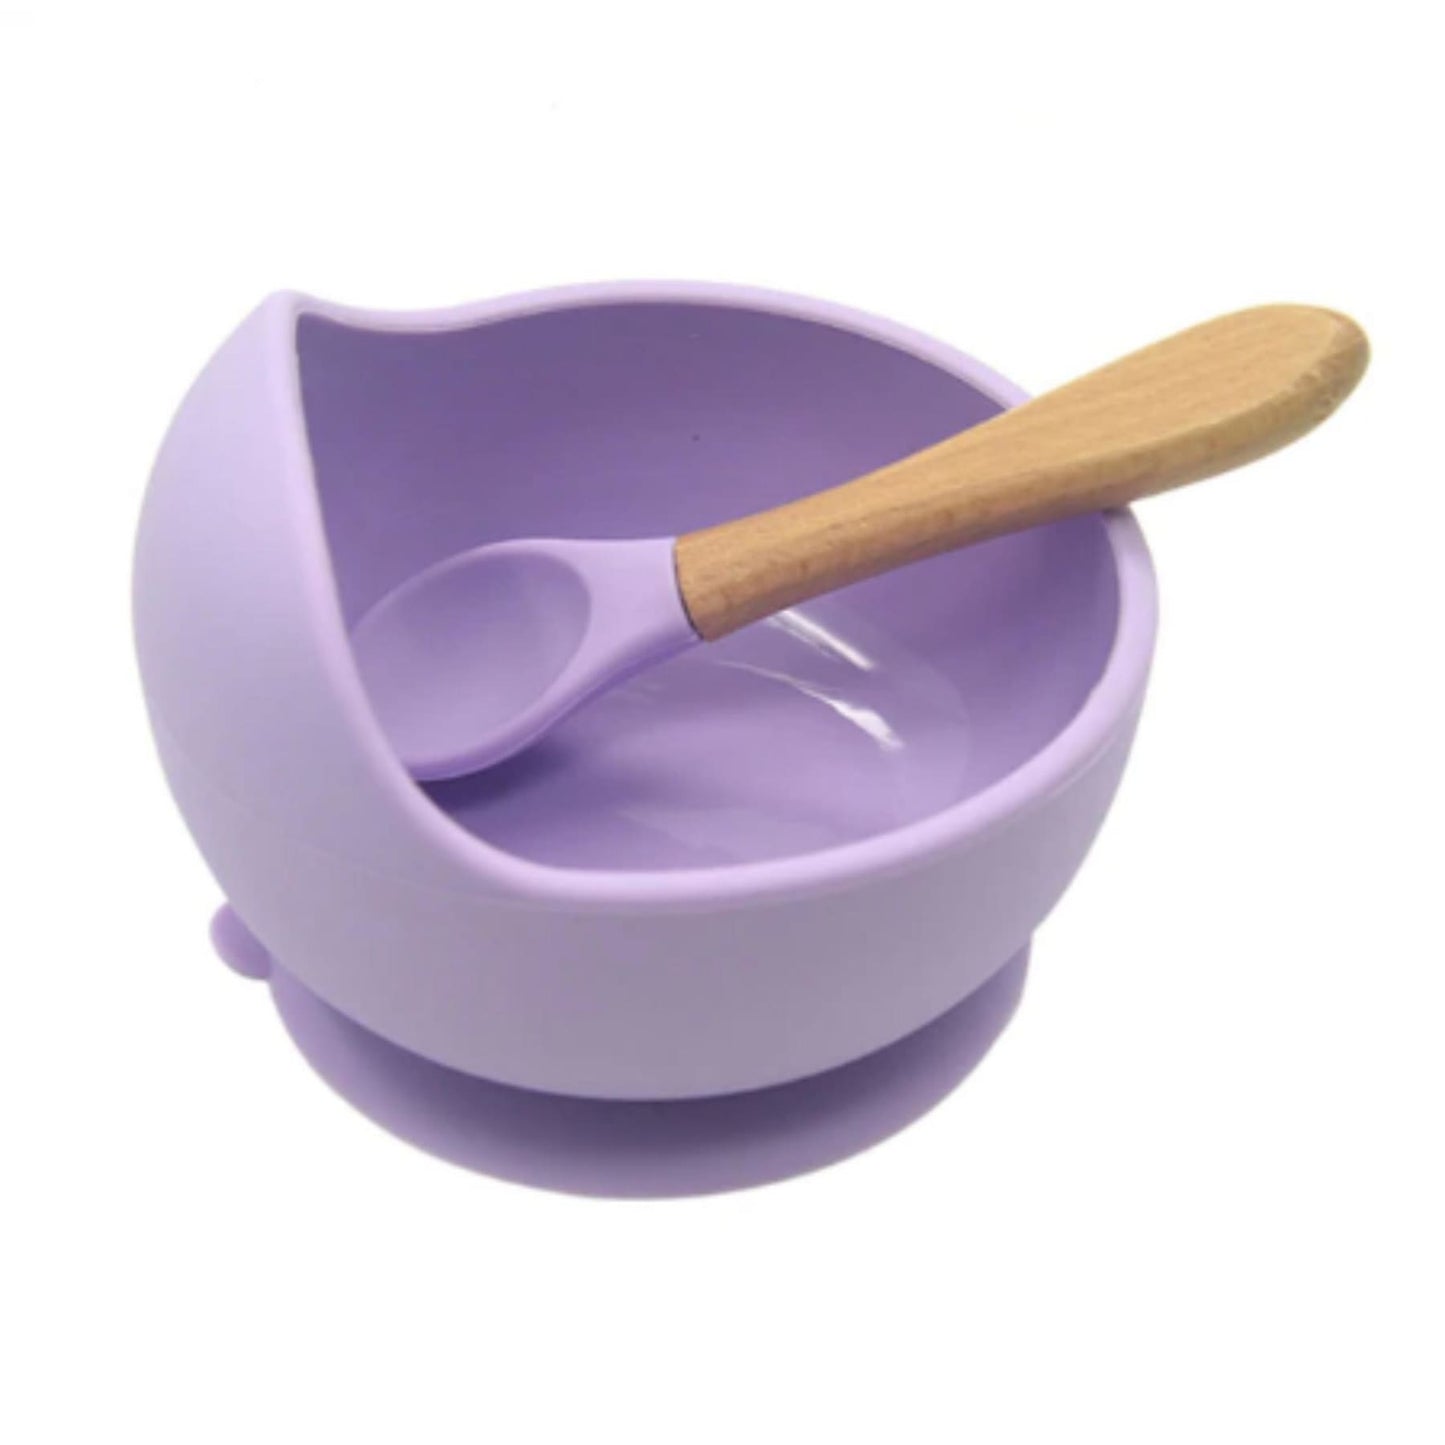 Wholesale Baby Bowl Set W/ Spoon and Fork- 2 Assortments PURPLE PINK